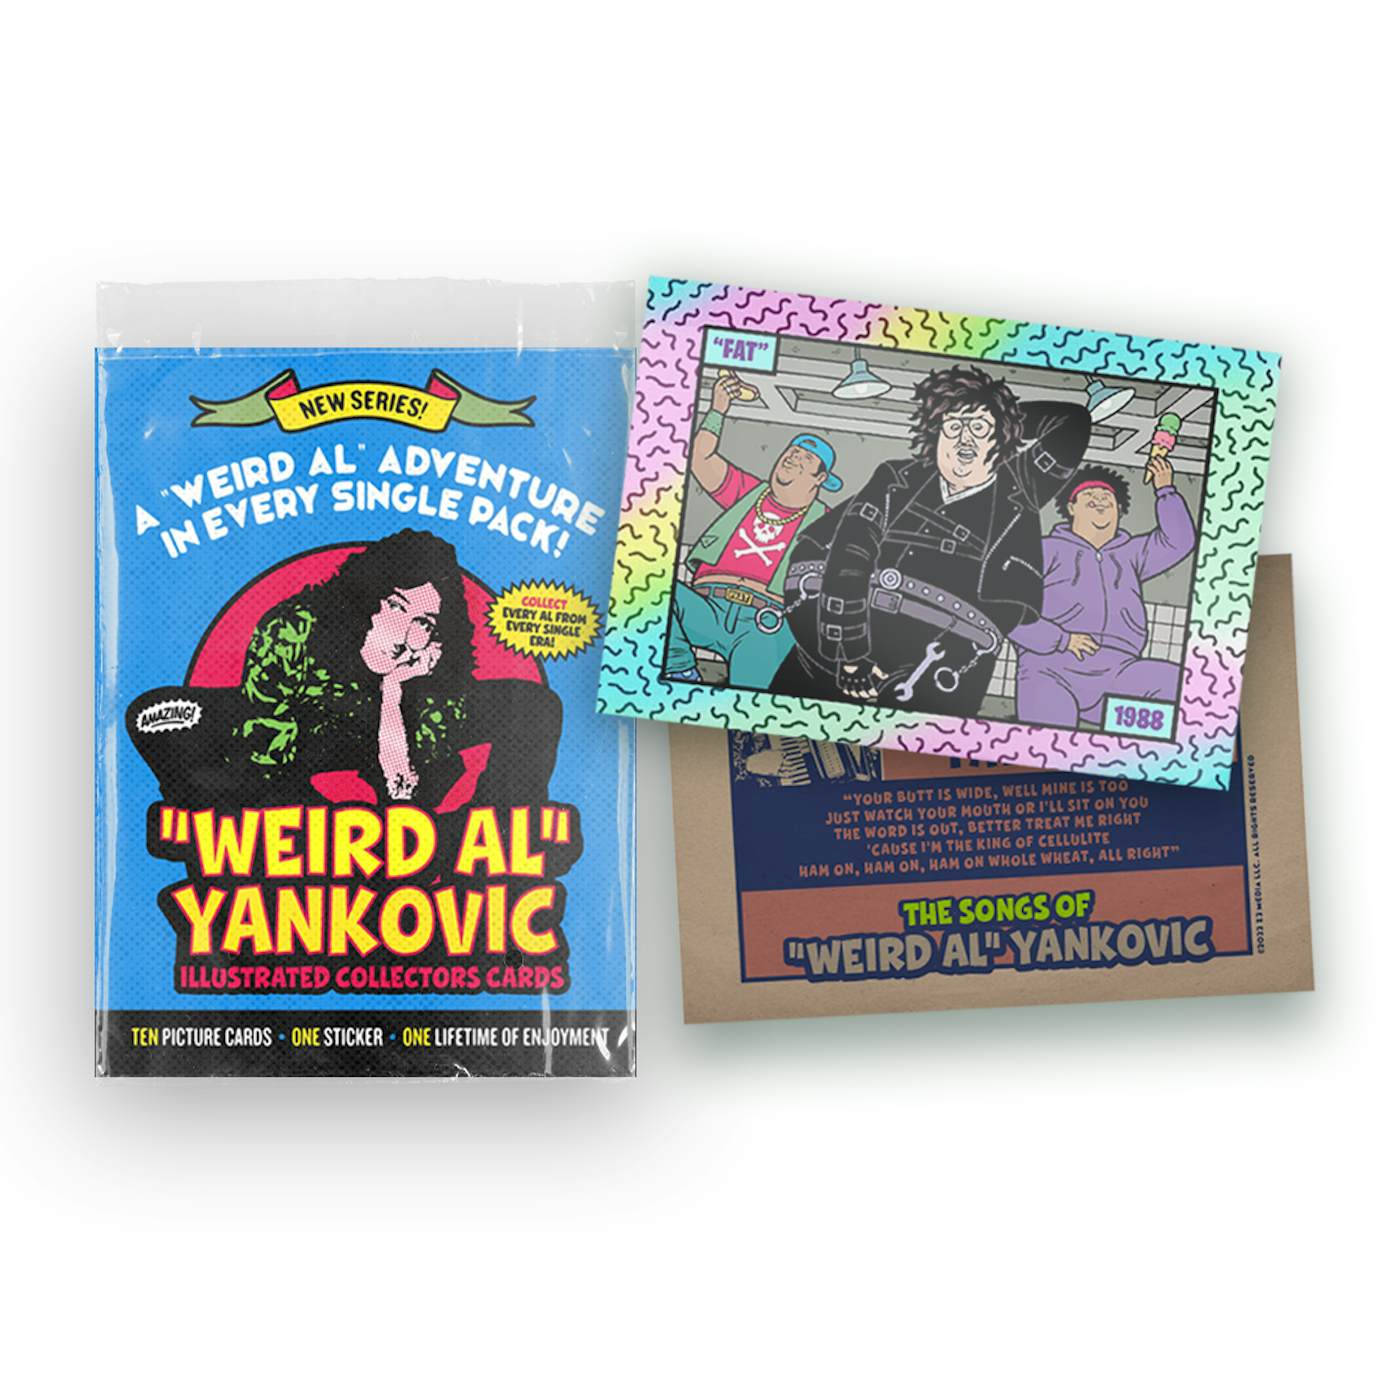 The Illustrated Al: The Songs of “"Weird Al" Yankovic” Yankovic - Deluxe Bundle